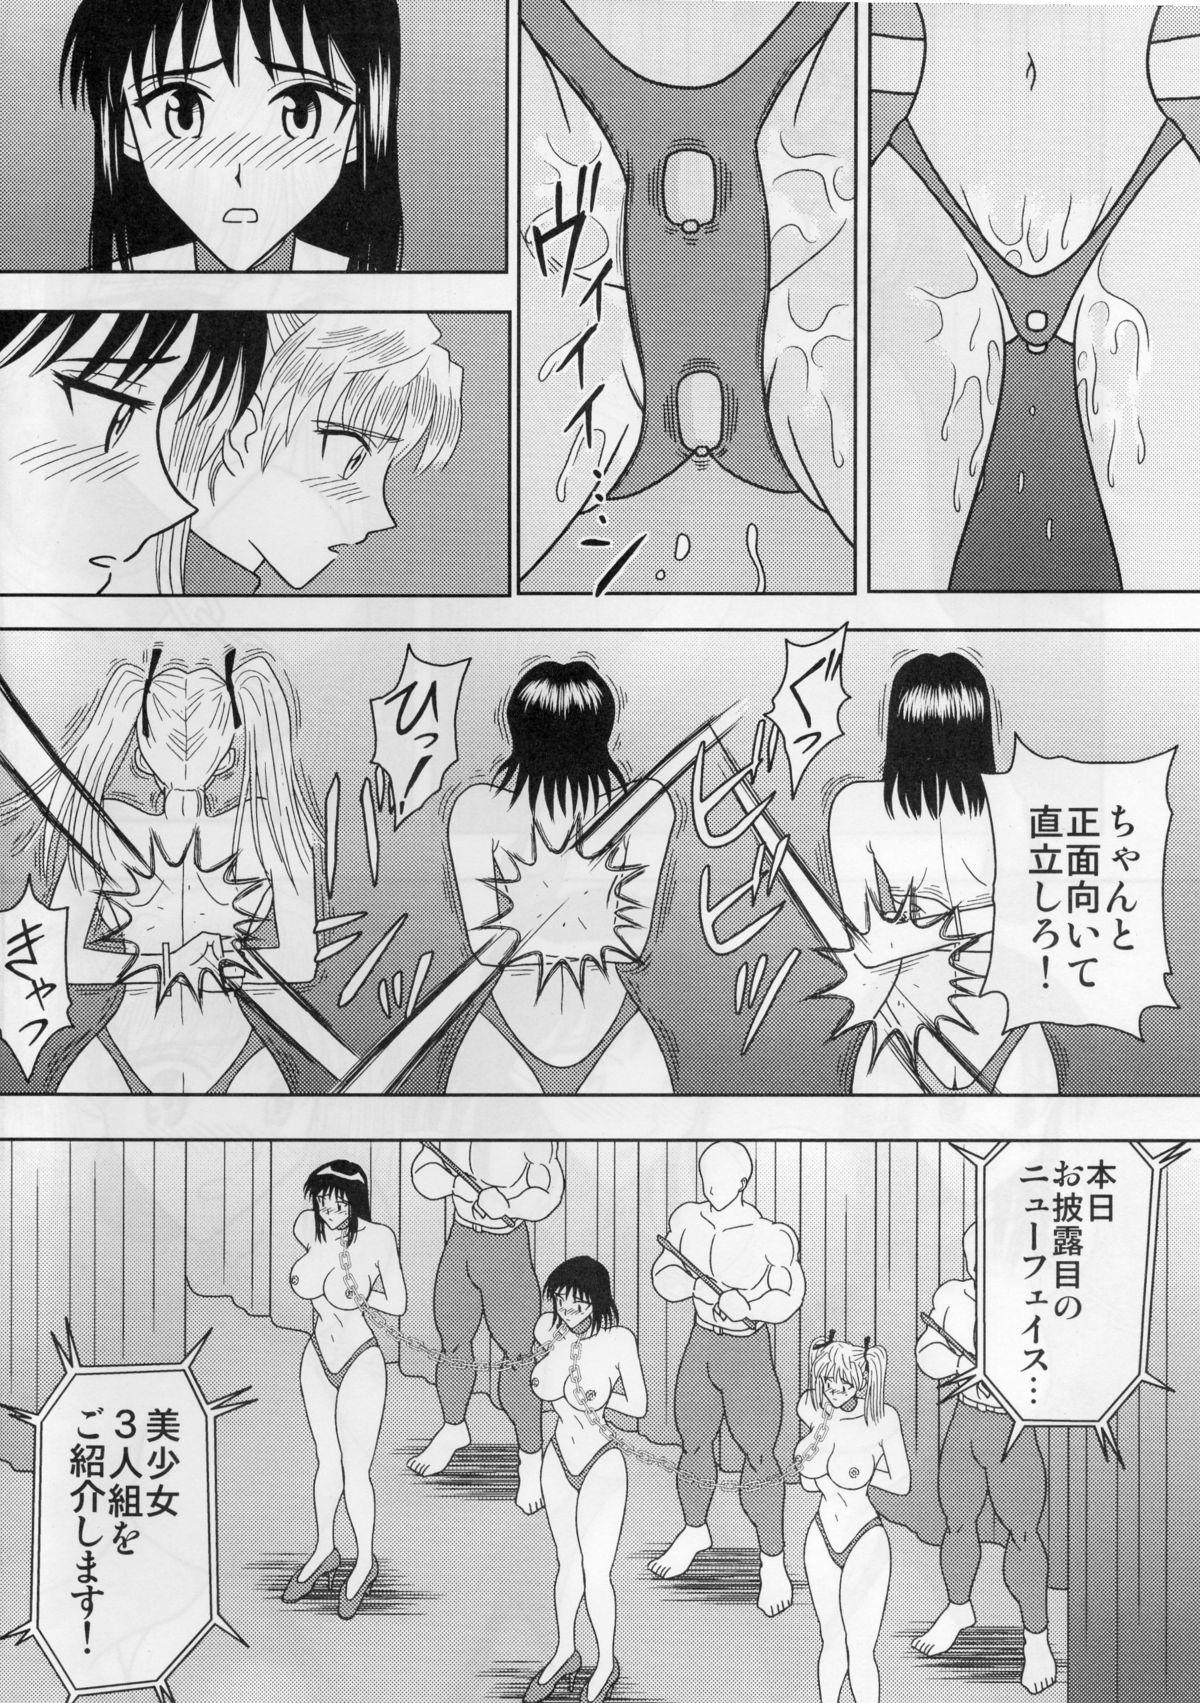 Sexy Slave Rumble 4 - School rumble Naked - Page 5